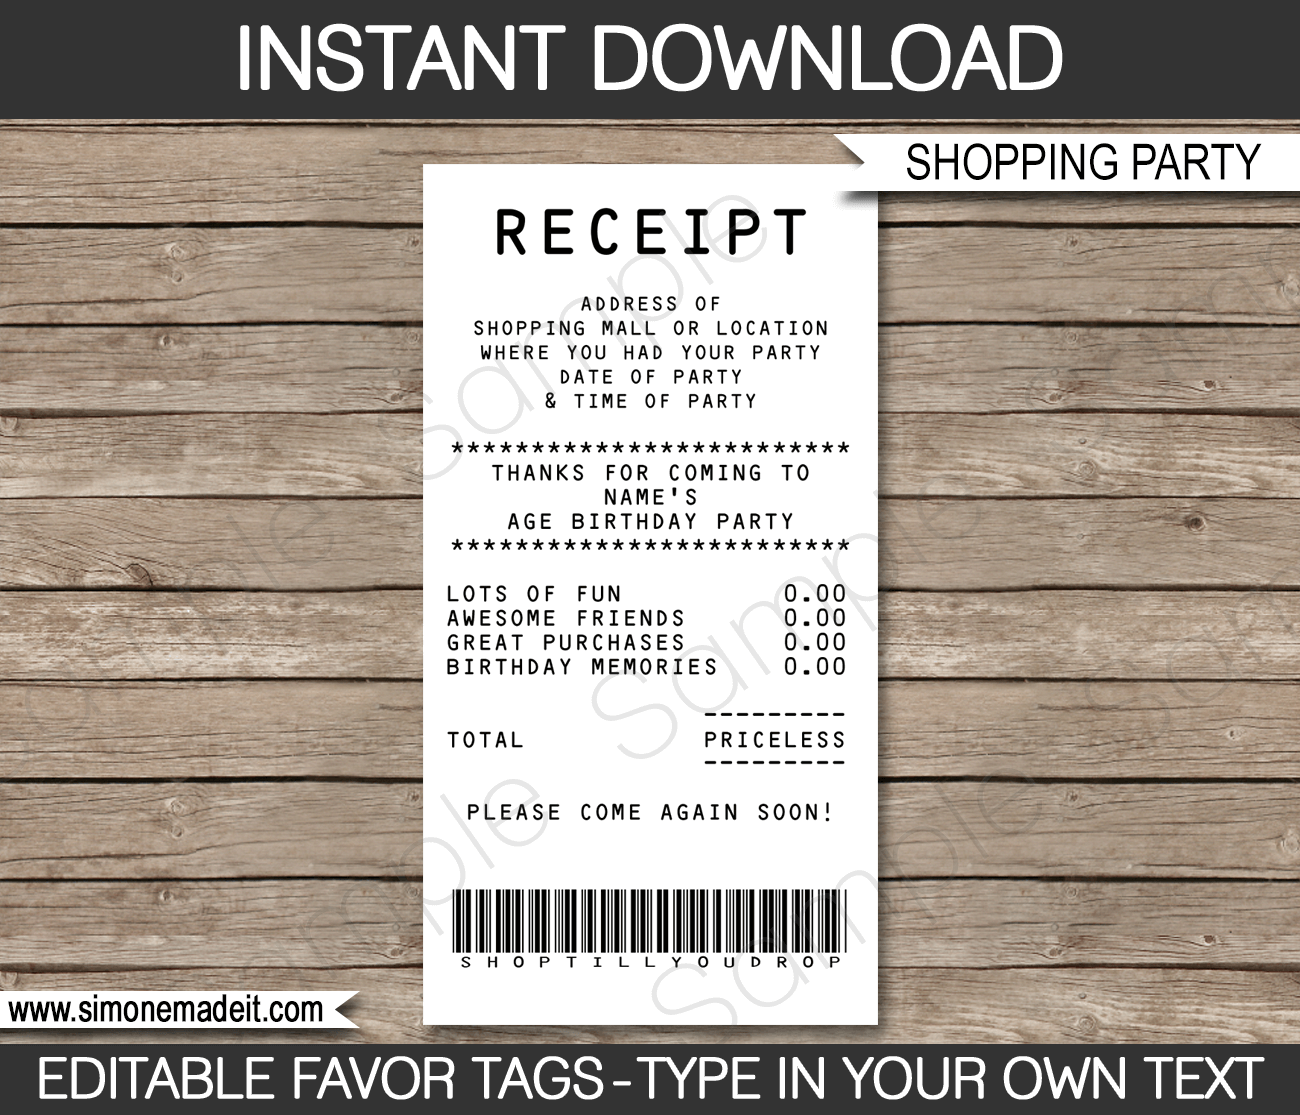 Credit Card Receipt Favor Tags | Thank You Tags | Shopping Party | Mall Scavenger Hunt | Editable and Printable DIY Template | Instant Download via simonemadeit.com